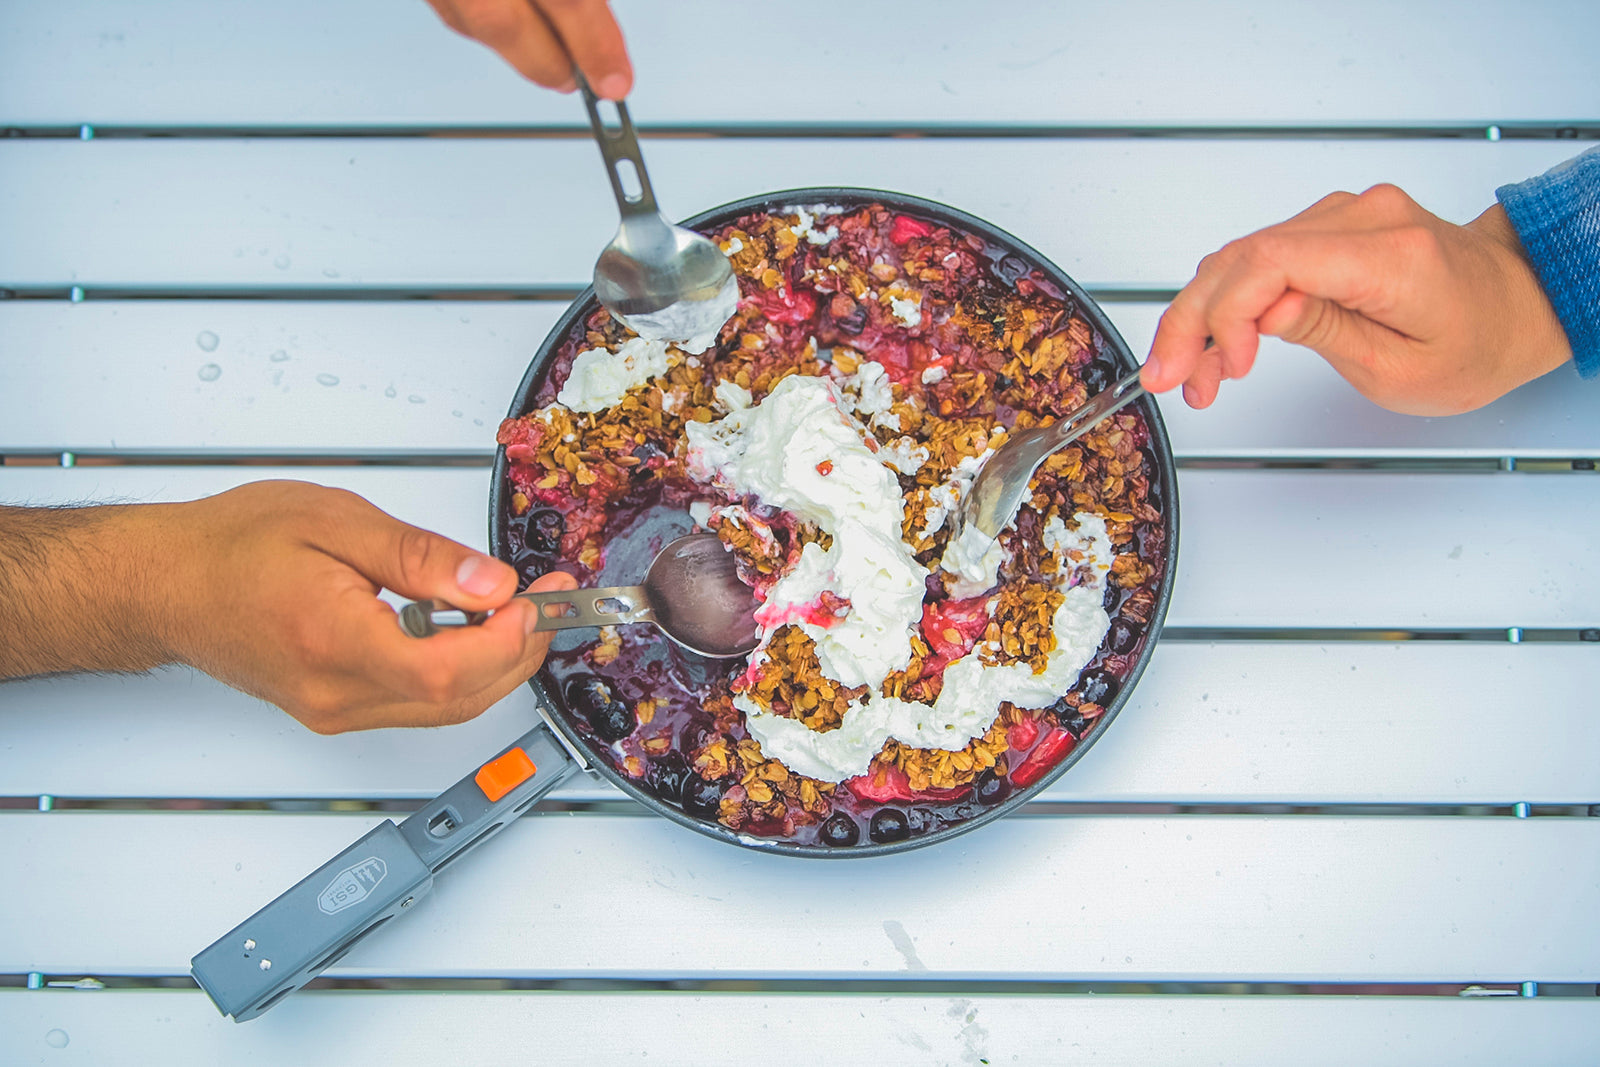 Celebrate The 4th With This Dessert Fruit Crumble Recipe